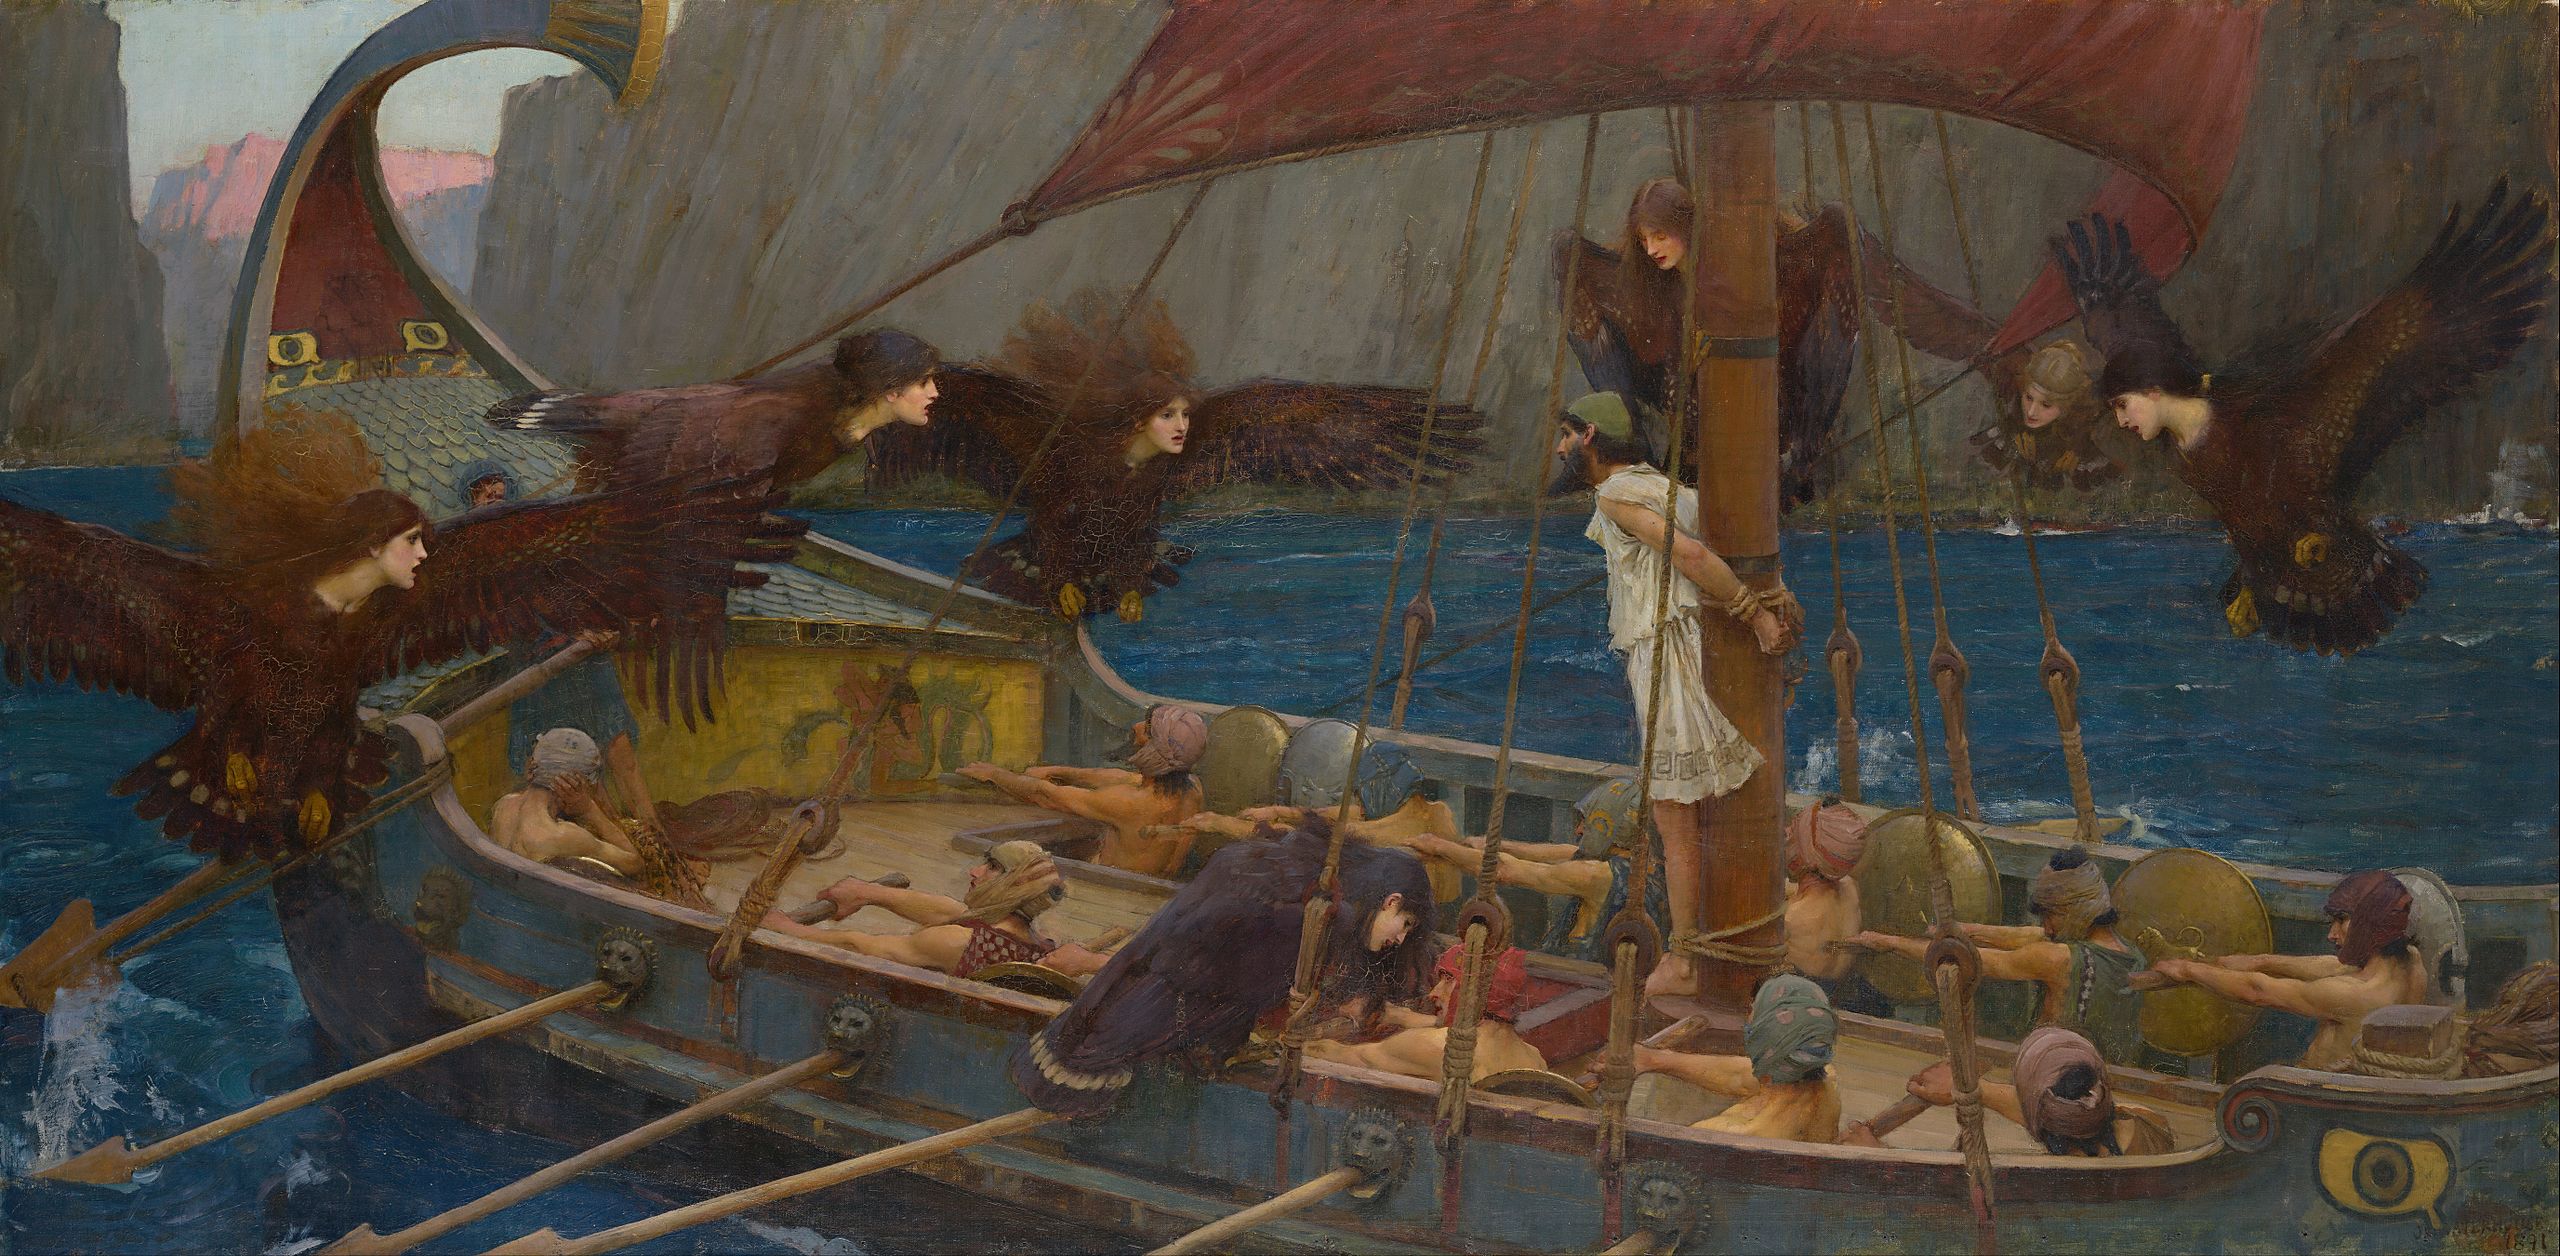 A man tied to the mast of a sailboat surrounded by flying vultures with human heads